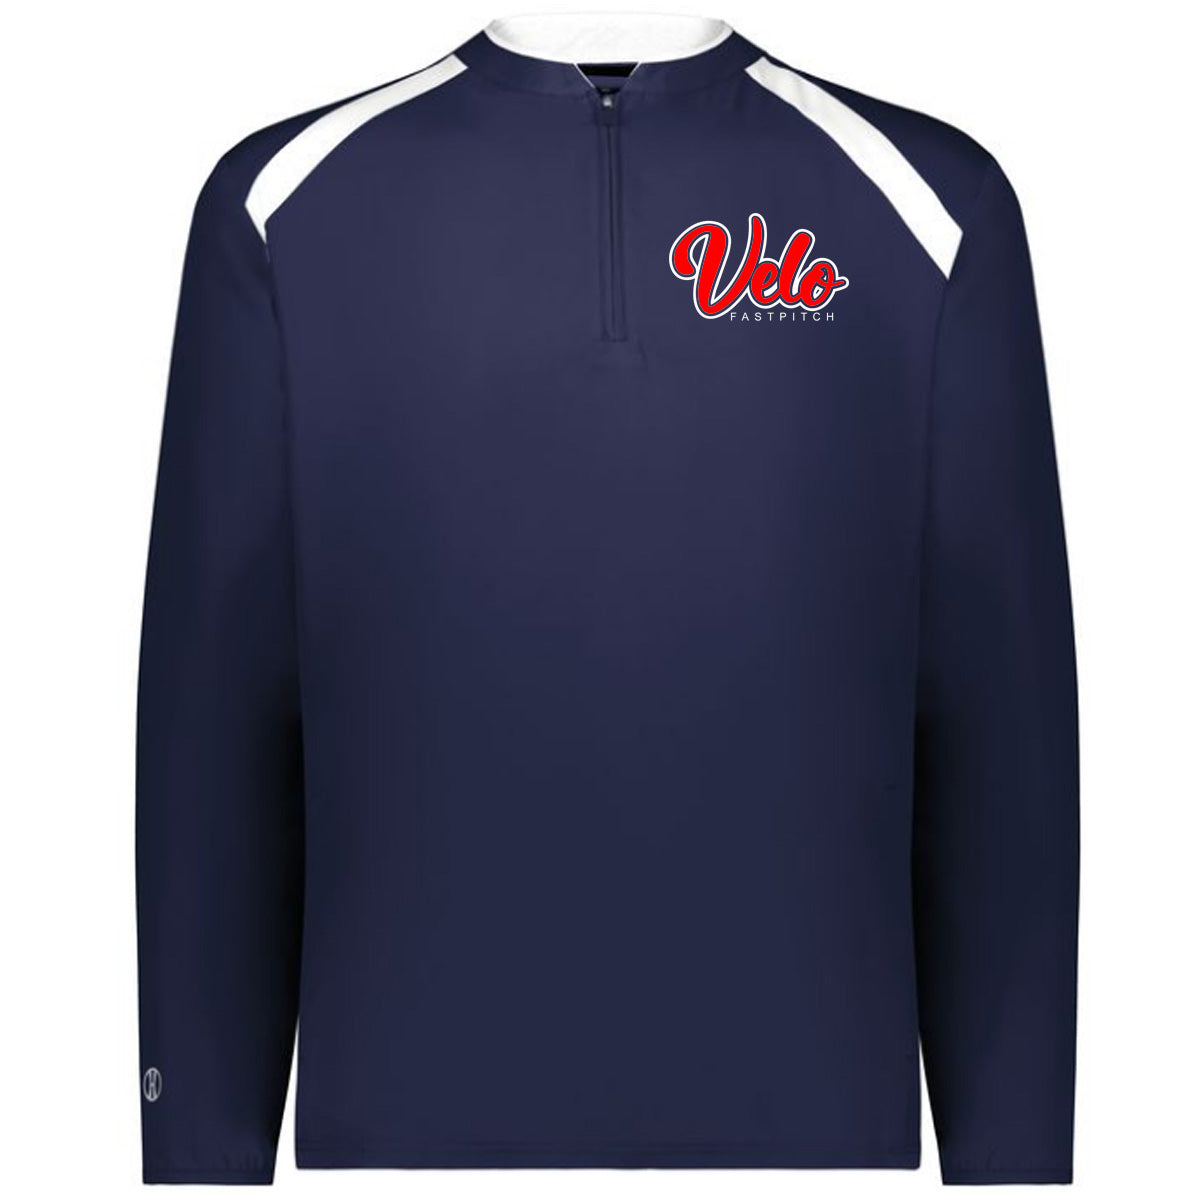 Velo FP - Clubhouse Longsleeves Cage Jacket with Velo Script - Navy - Southern Grace Creations